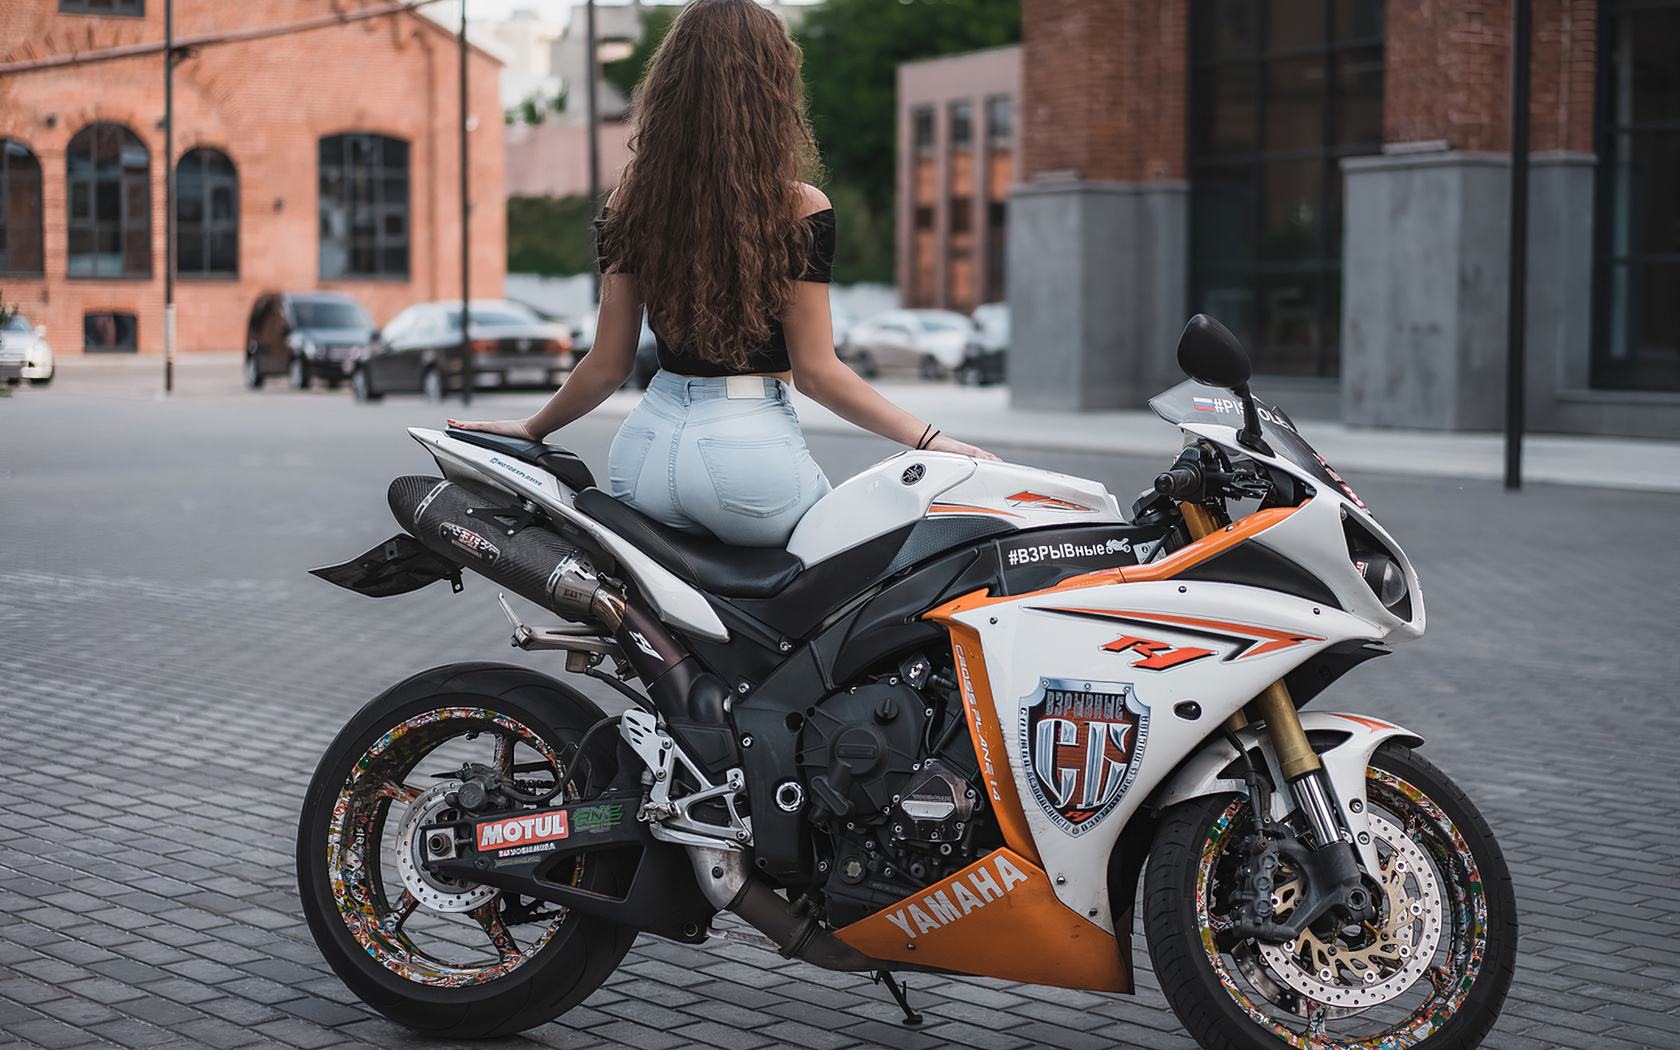 motorcycle, girl, yamaha, r1, road, city, street, brunette, jeans, brown hair, sexy